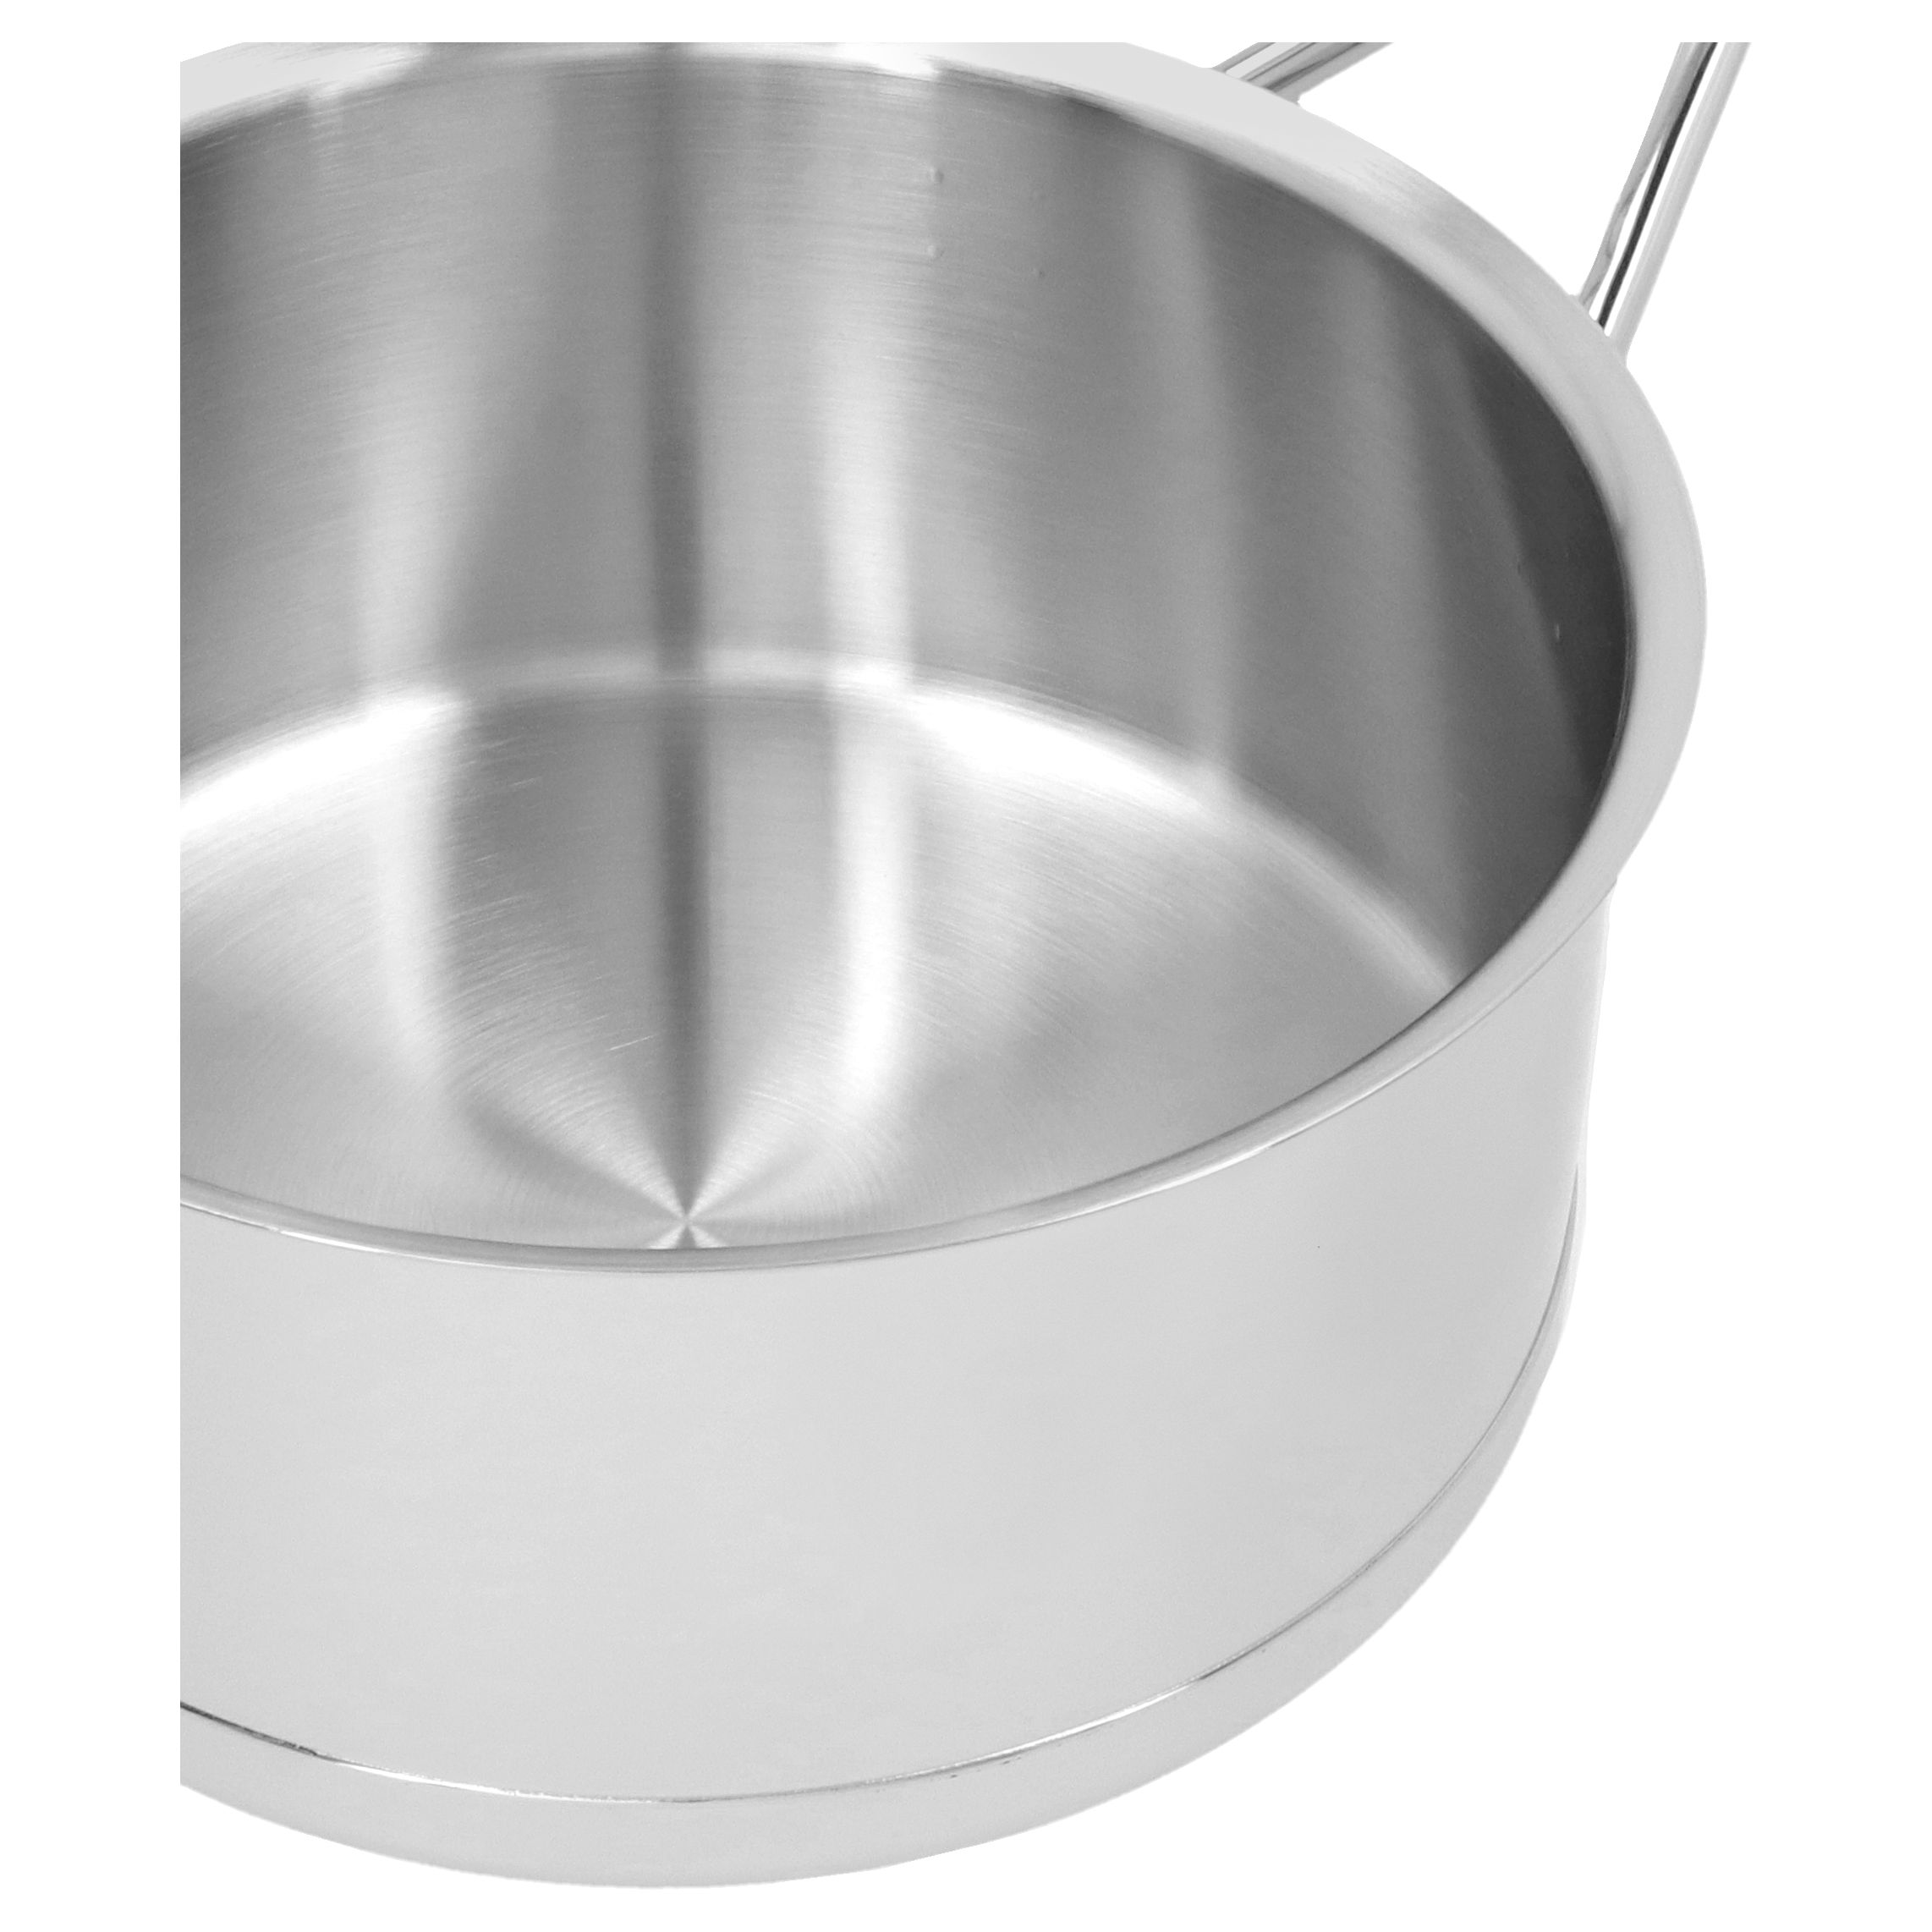 Demeyere Silver7 Covered Saute Pan - 60424A-60524, Silver